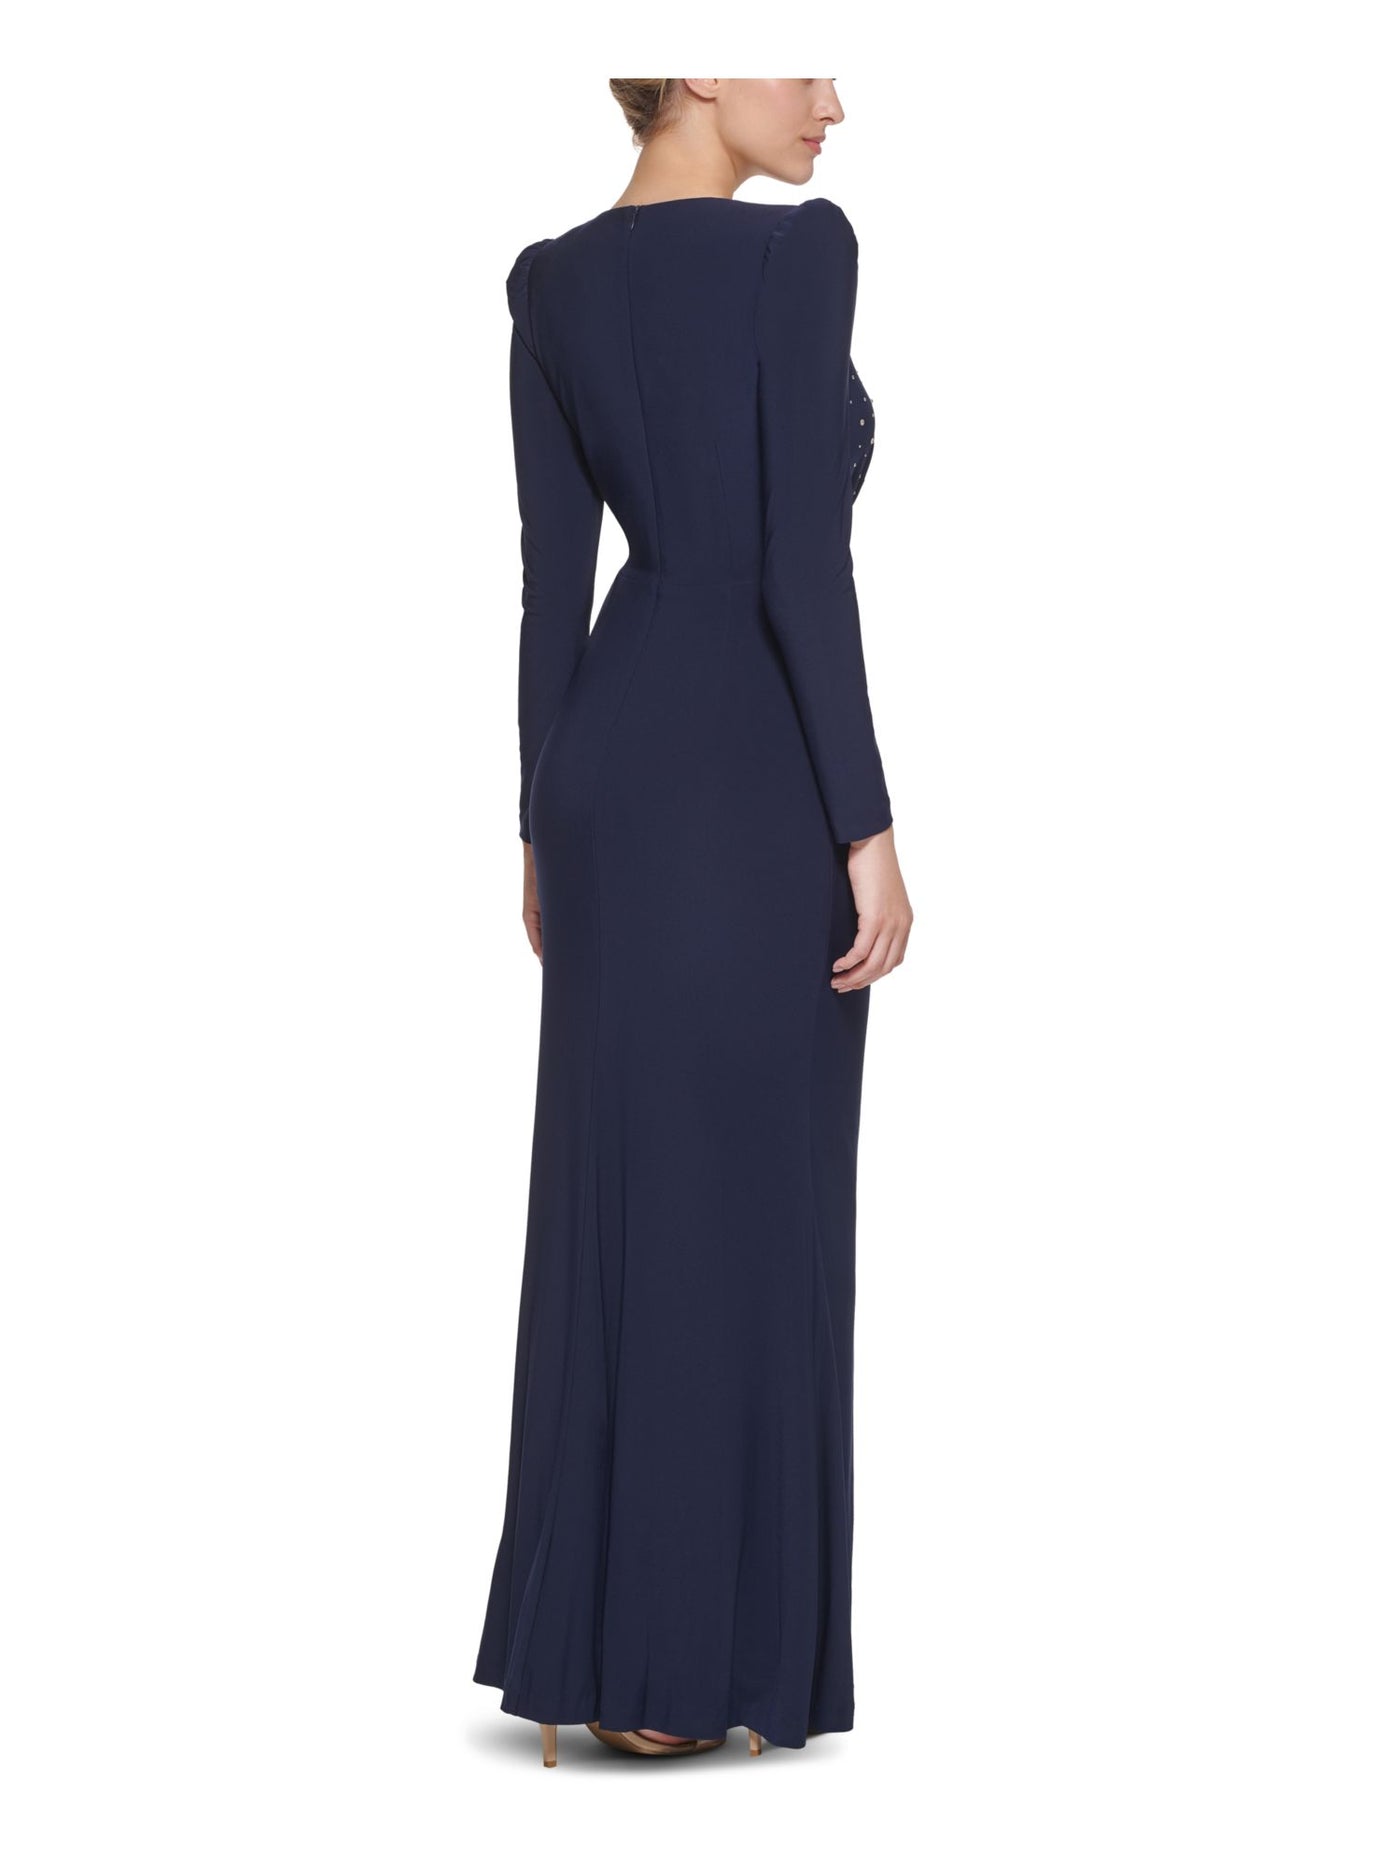 VINCE CAMUTO Womens Navy Embellished Zippered Ruched Slit Gathered Long Sleeve Surplice Neckline Full-Length Evening Gown Dress 4